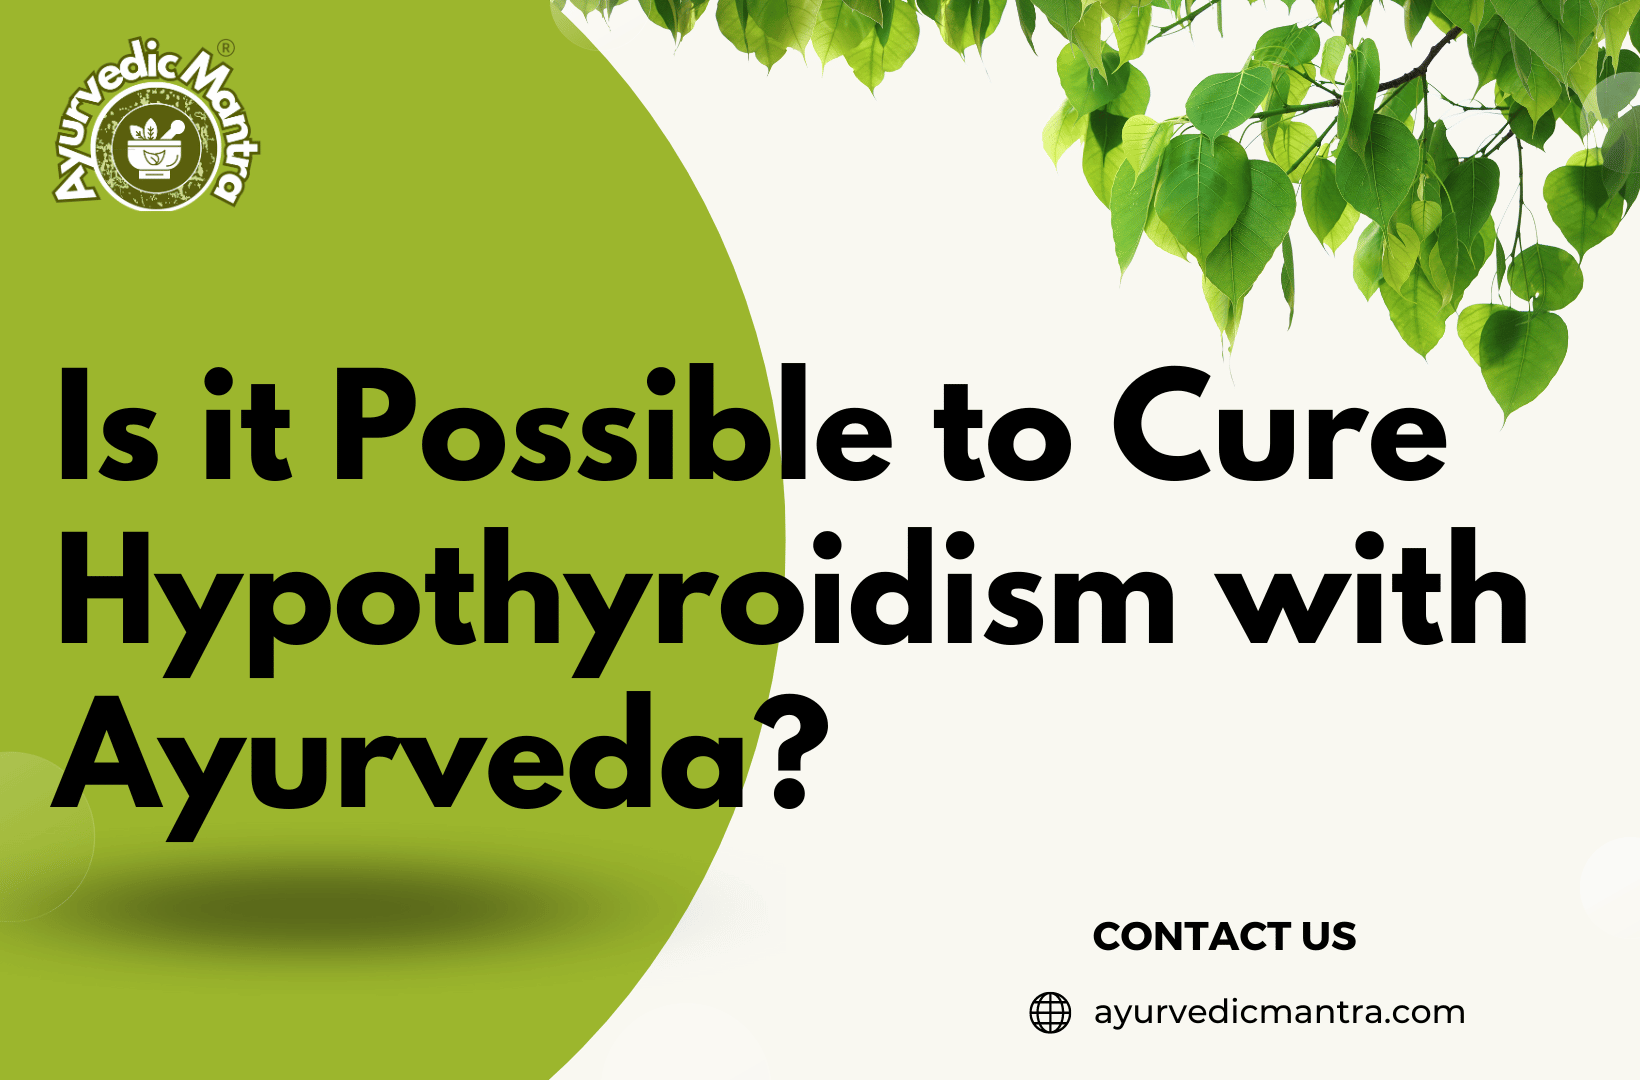 Is it Possible to Cure Hypothyroidism with Ayurveda